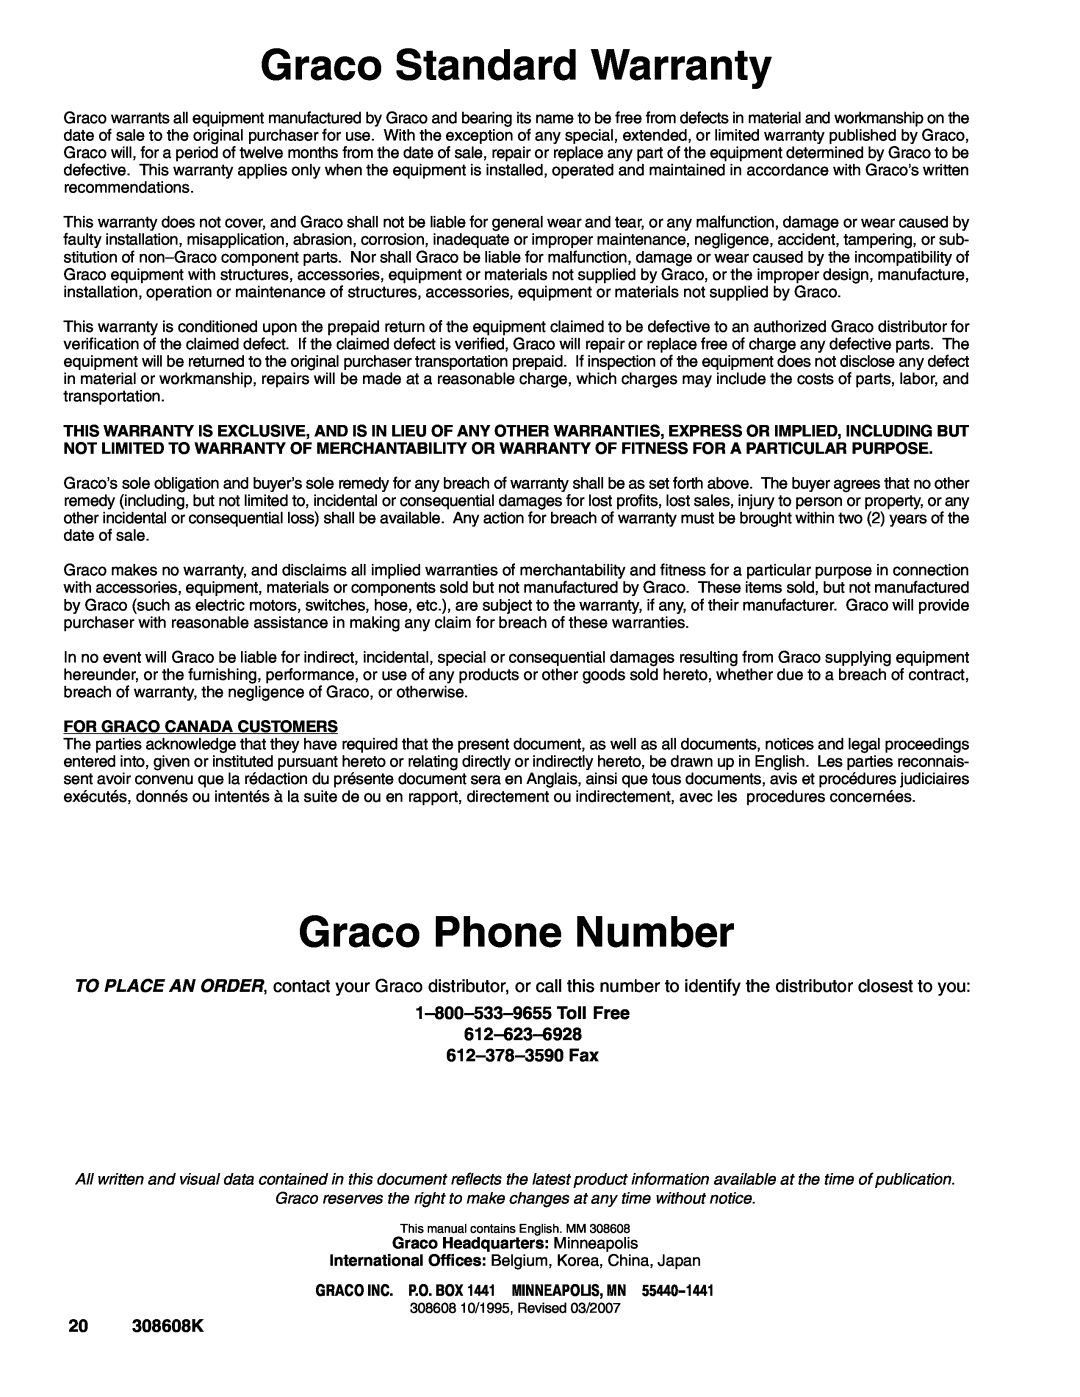 Graco Series D, 238108 important safety instructions Graco Standard Warranty, Graco Phone Number, 20 308608K 